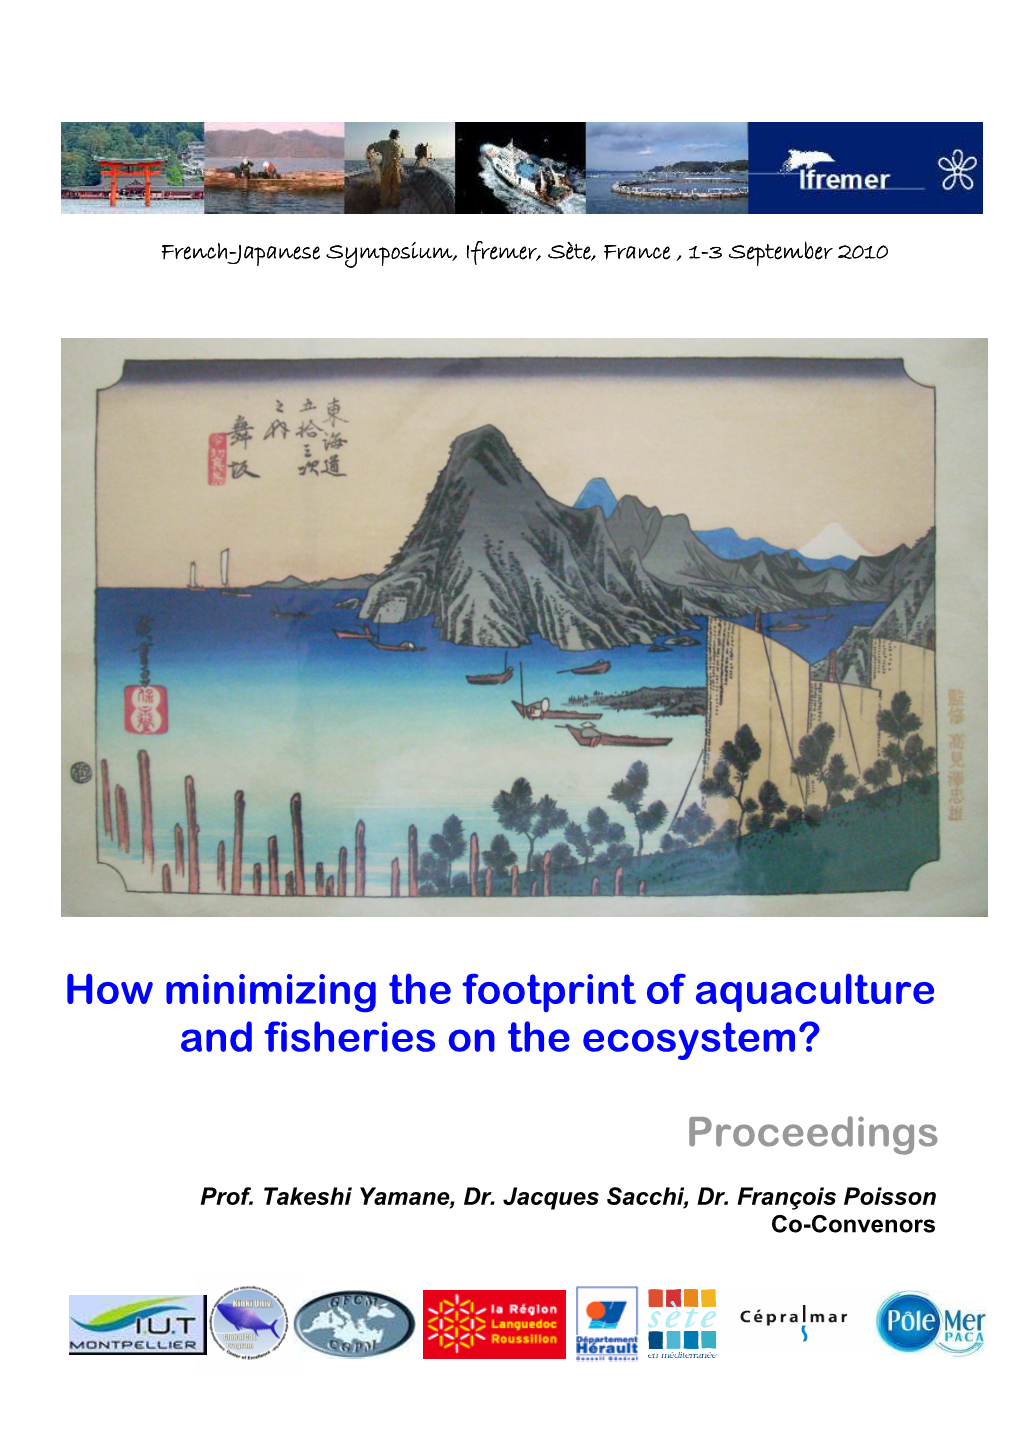 How Minimizing the Footprint of Aquaculture and Fisheries on the Ecosystem? Proceedings